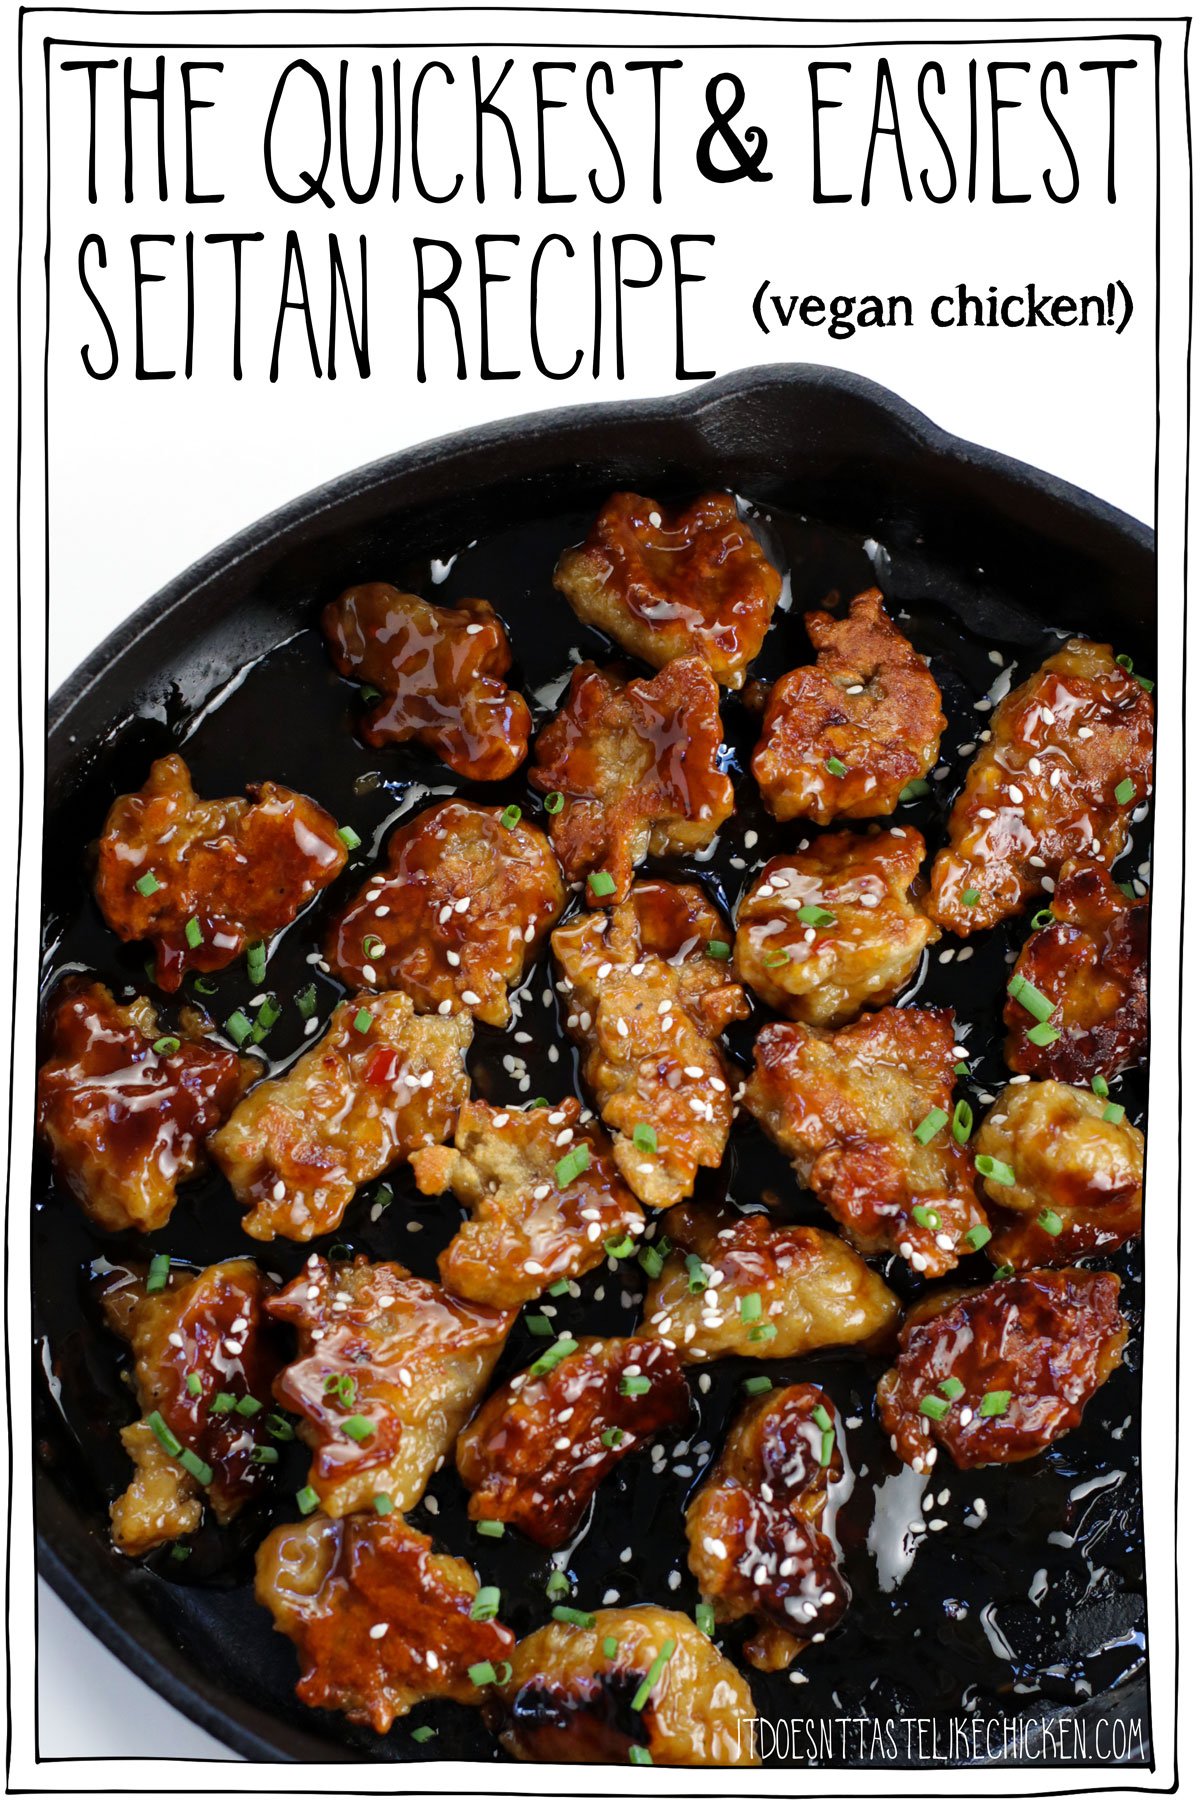 Just 20 minutes to make, and only 7 ingredients, this is by far the quickest and easiest seitan recipe ever!! This vegan chicken alternative is simple to whip up and perfect to add to any meal.  Crispy crunchy on the outside, and tender chewy in the middle. The perfect meaty texture to amp up any vegan meal! If you are new to making seitan this is the perfect recipe for beginners to try. #itdoesnttastelikechicken #seitan #veganrecipes